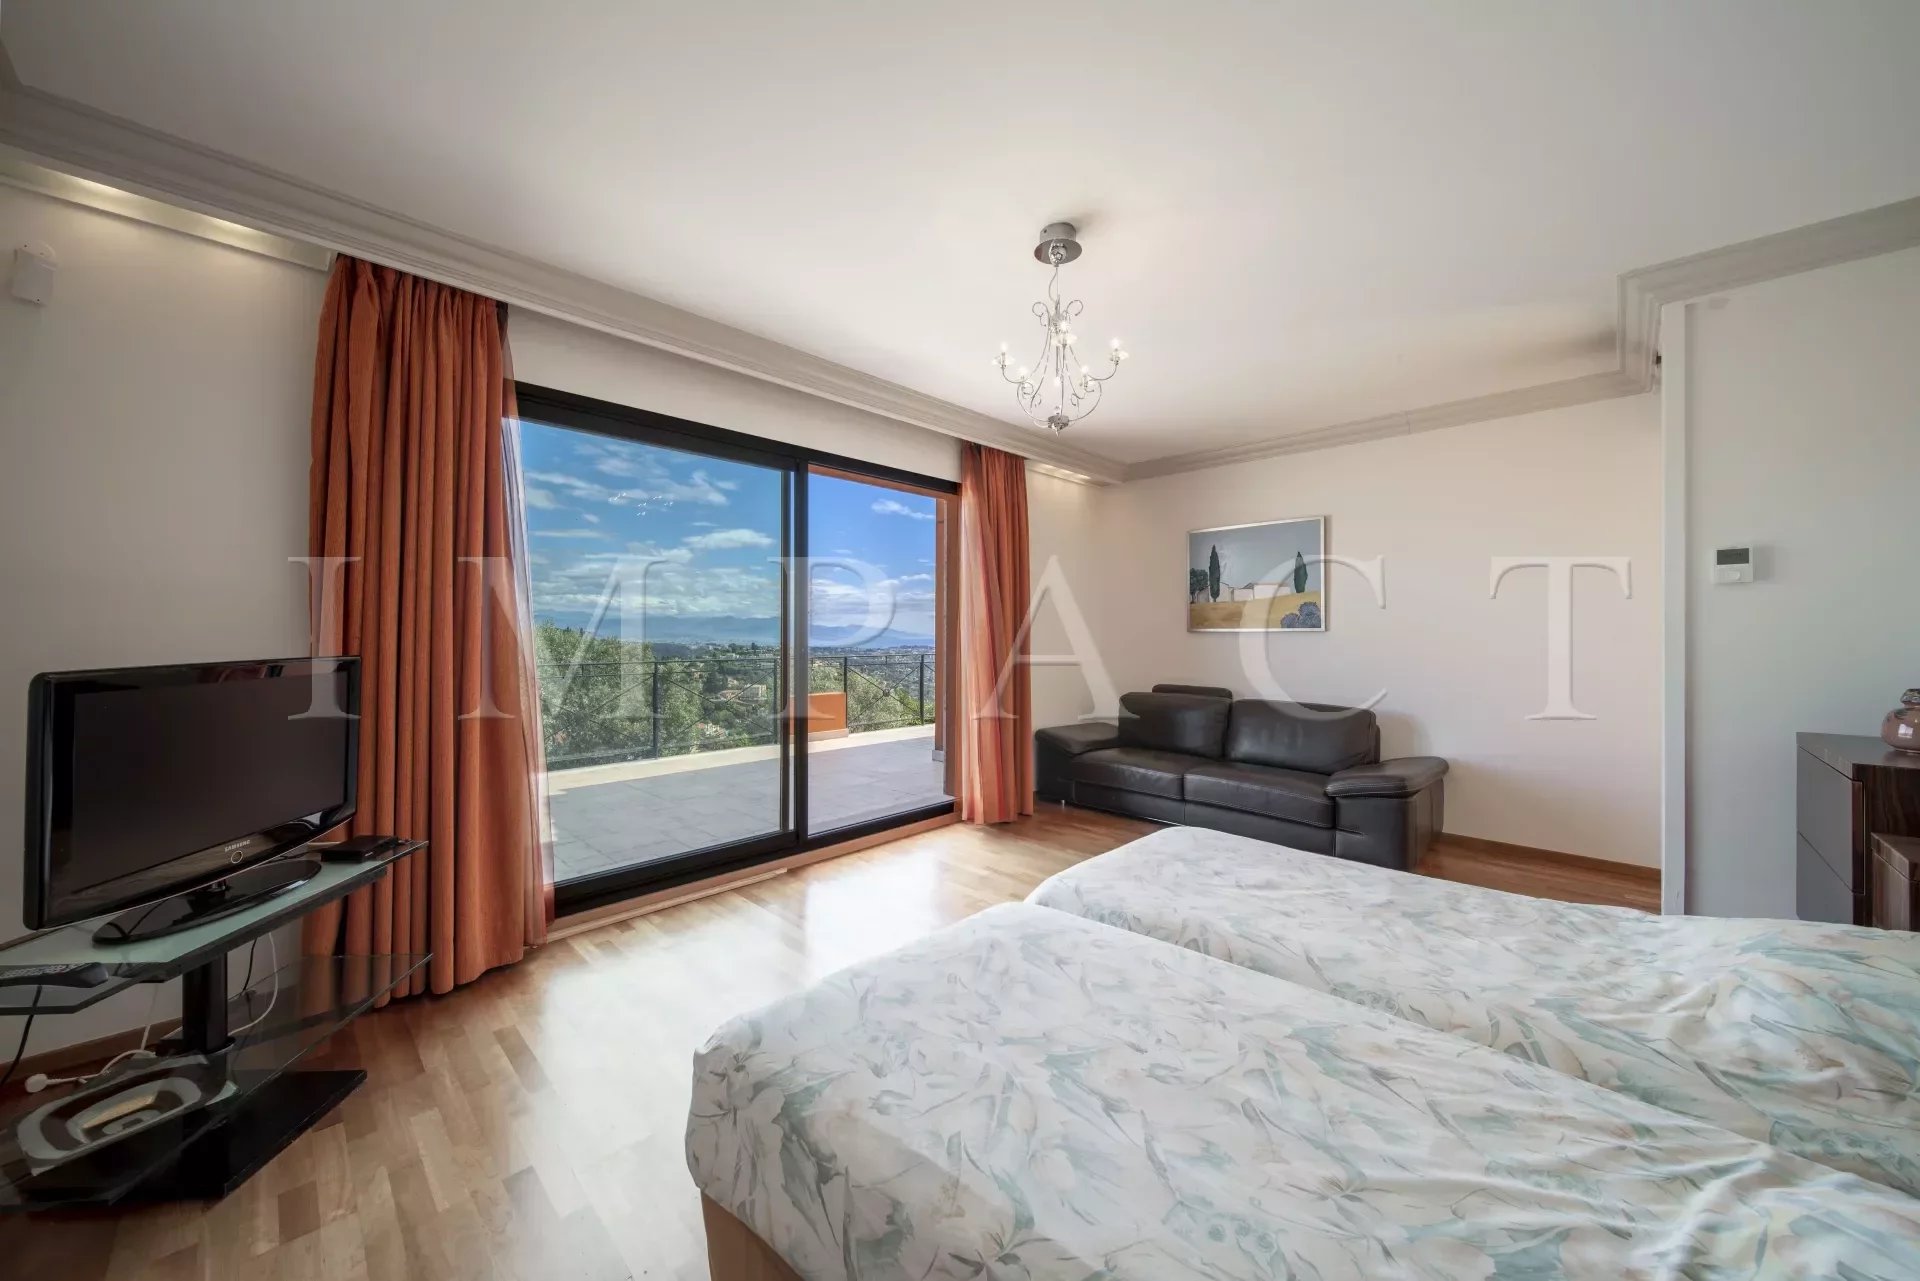 TOP OF THE HILLS - PANORAMIC SEA VIEW -